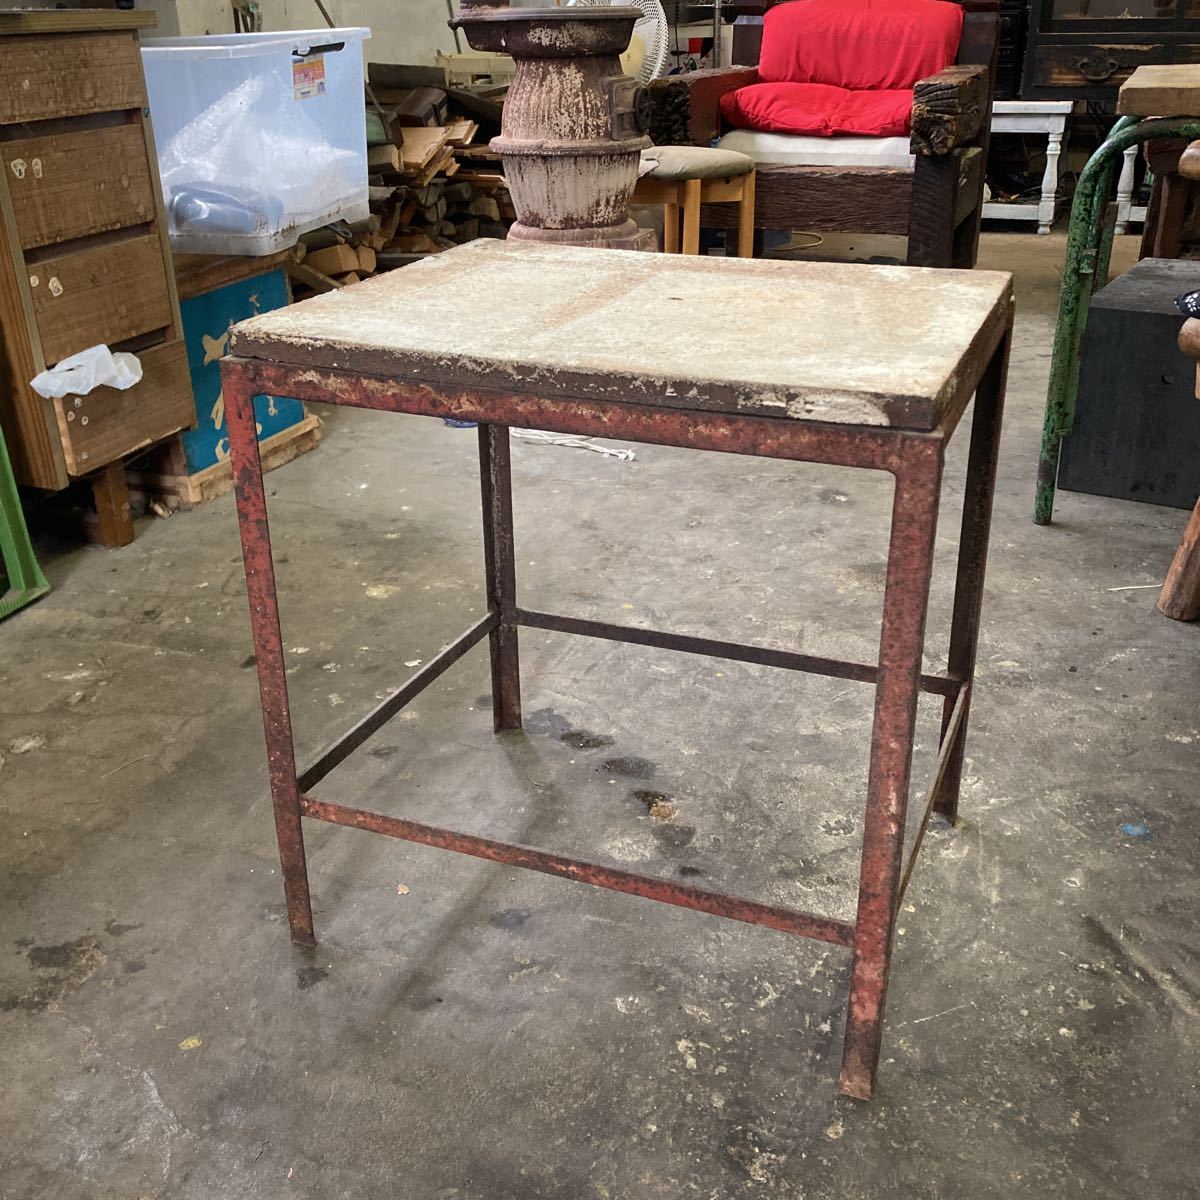 Rare item Table with ceramic top Rusted iron iron frame Store fixtures Antique Custom-made table Pick-up possible Matoba, Kawagoe City, Saitama Prefecture, handmade works, furniture, Chair, table, desk